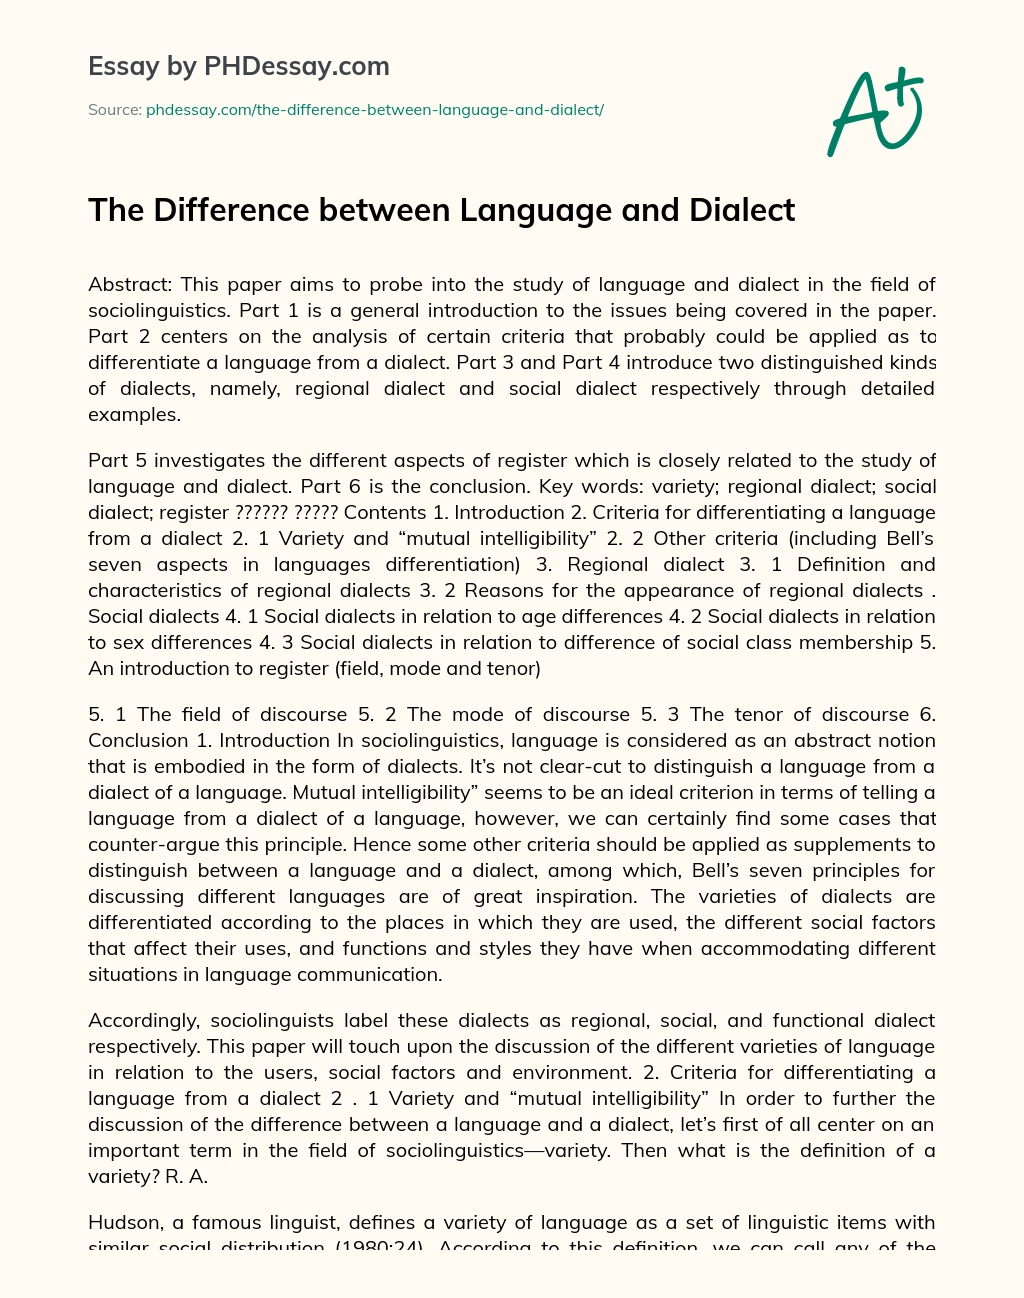 The Difference Between Language and Dialect essay